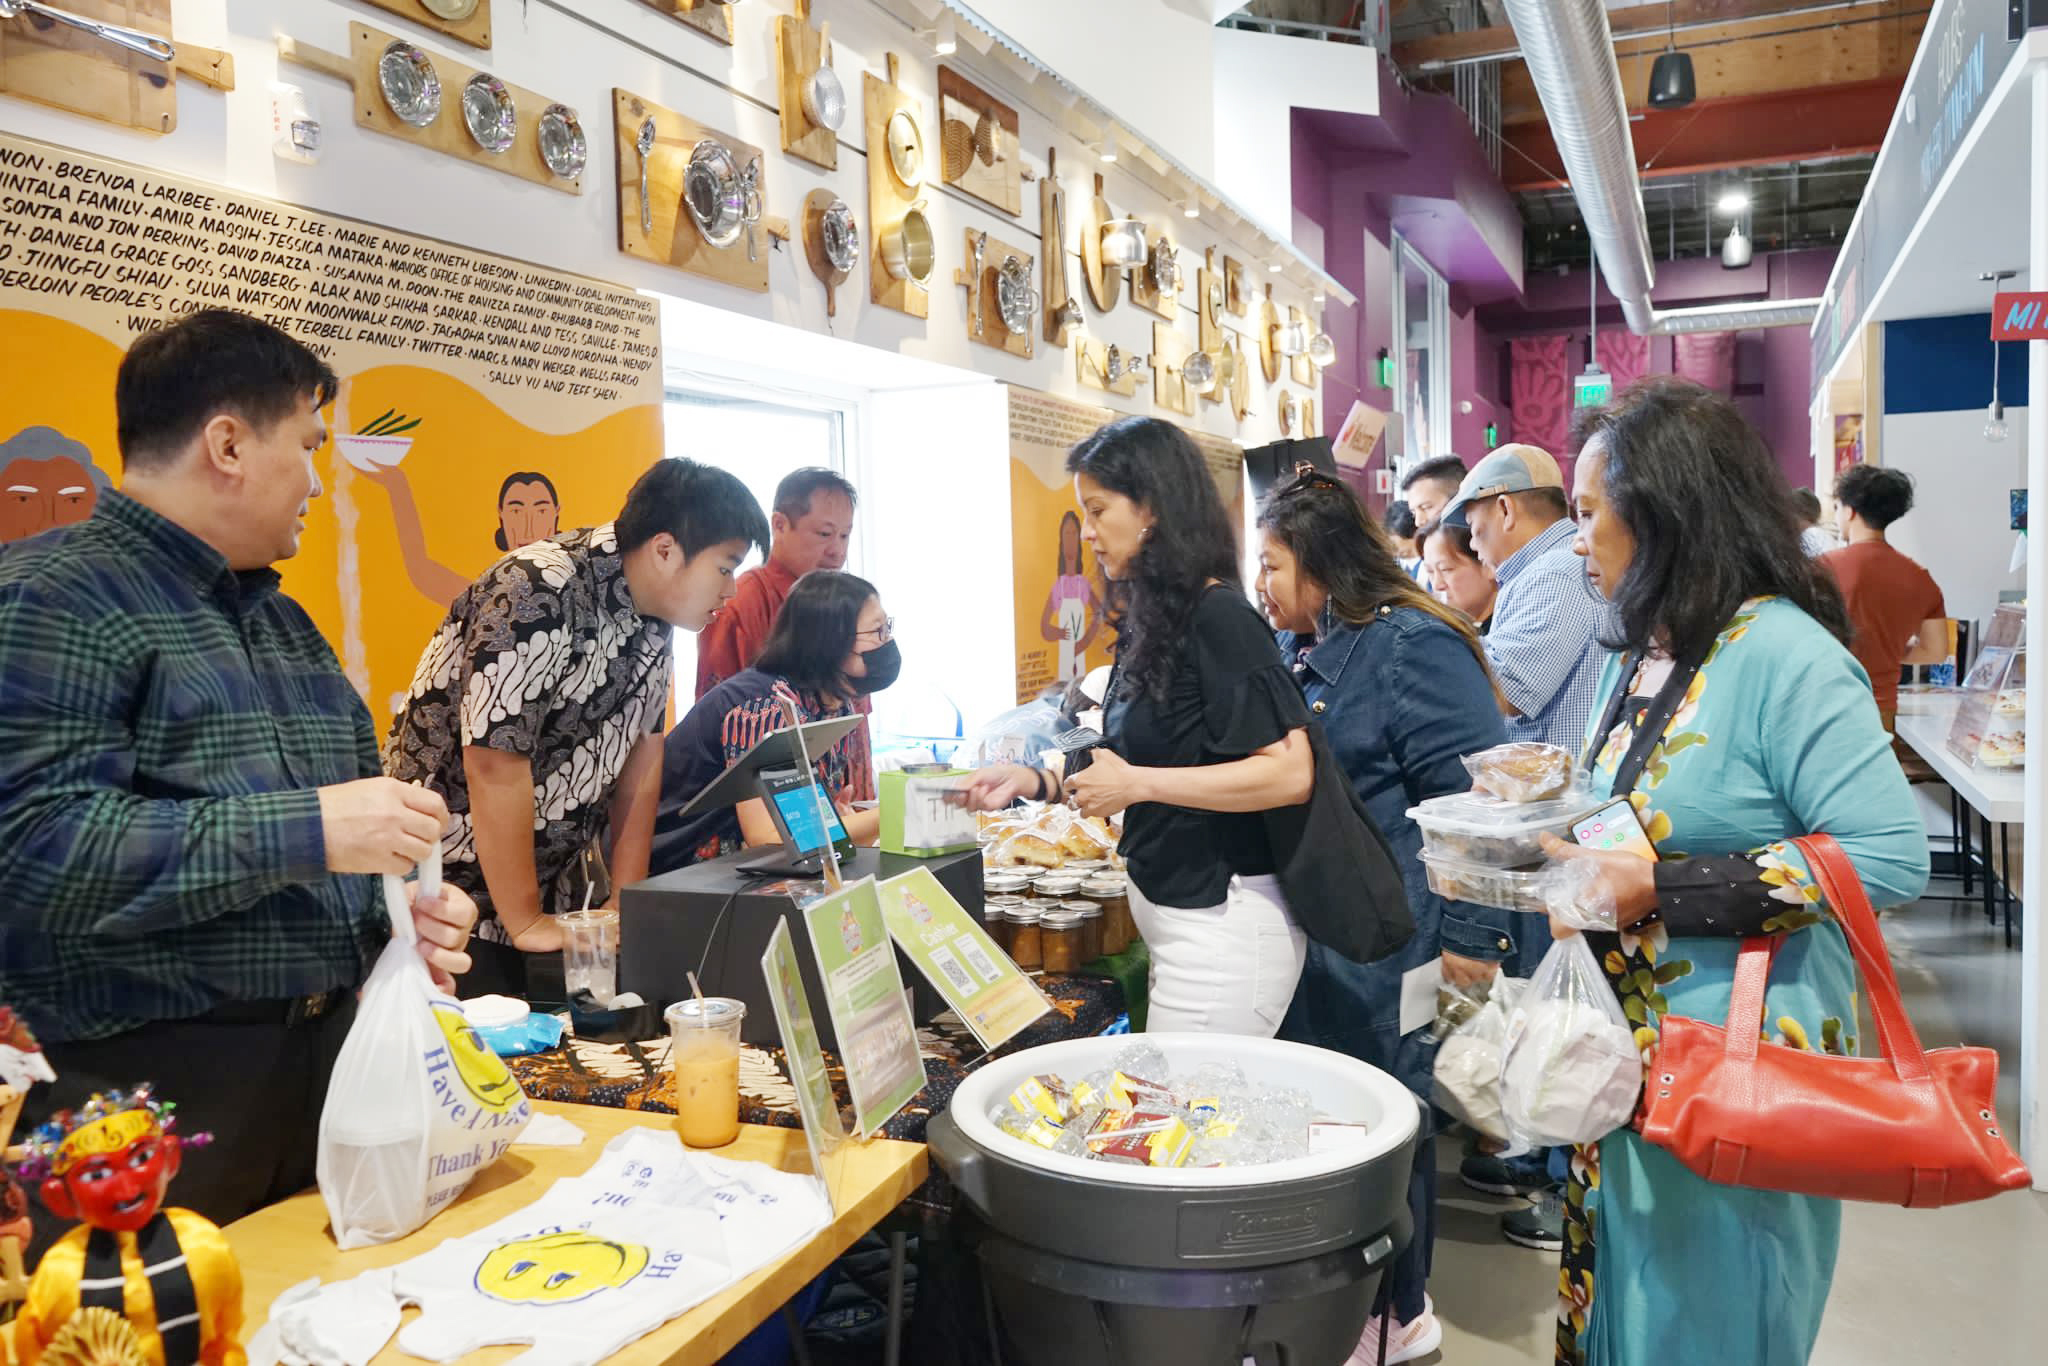 People browse and shop at a crowded indoor market, examining products at a colorful stall decorated with wooden masks.